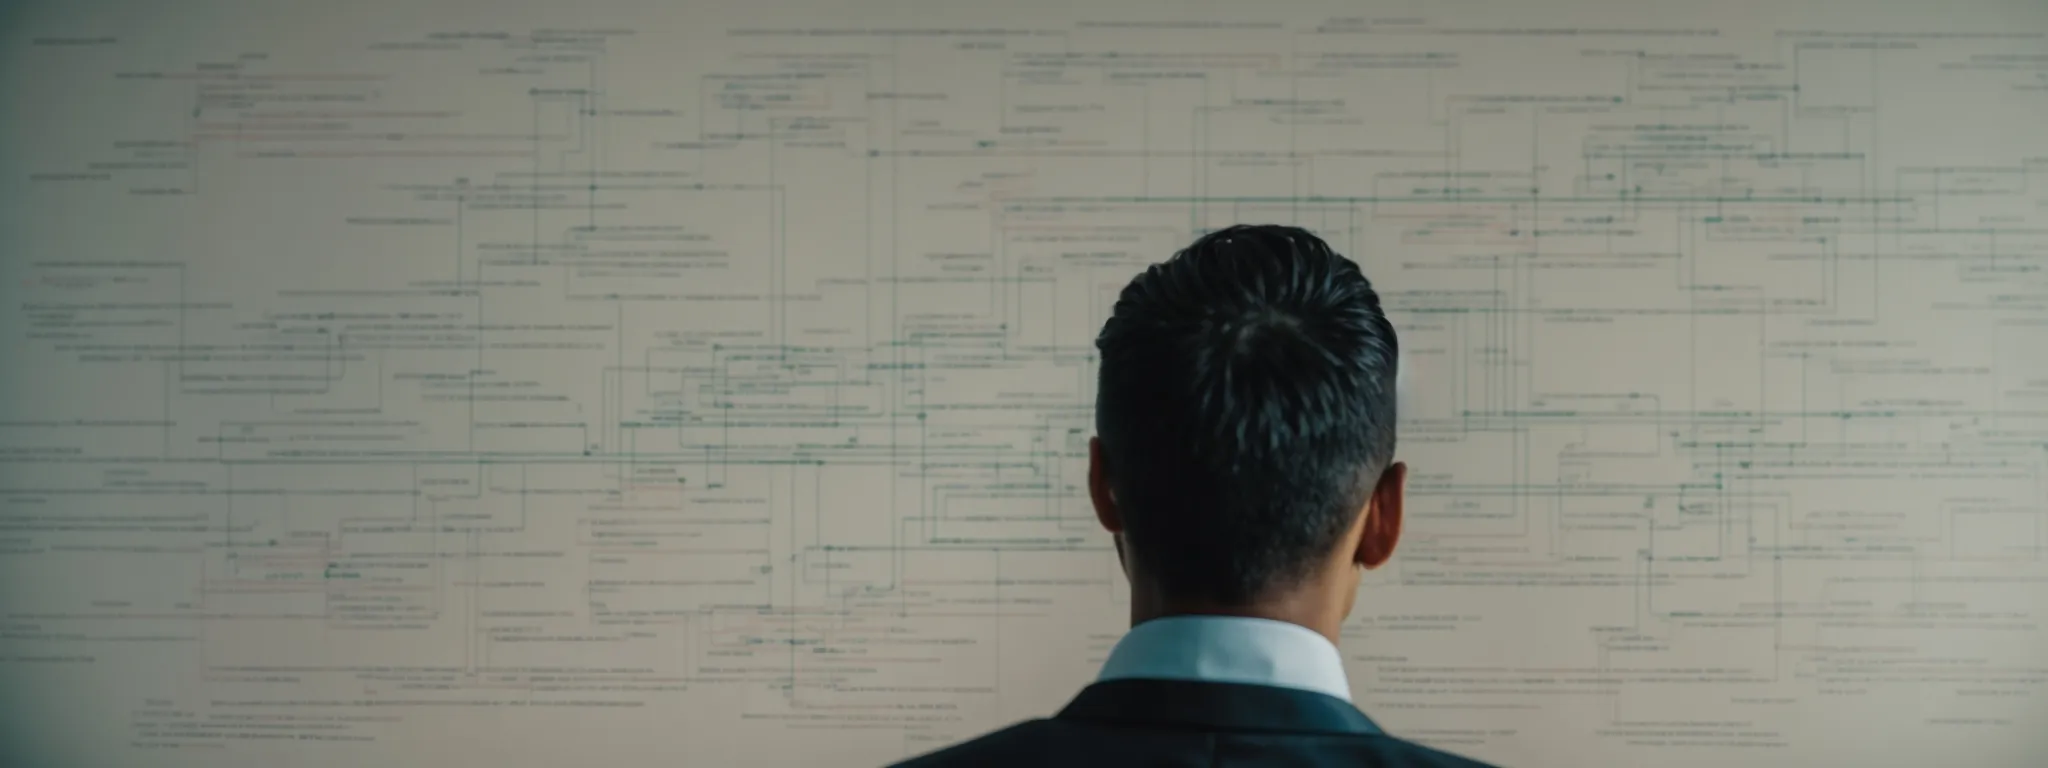 a focused individual analyzes a complex flowchart representing a website's structure on a digital interface.